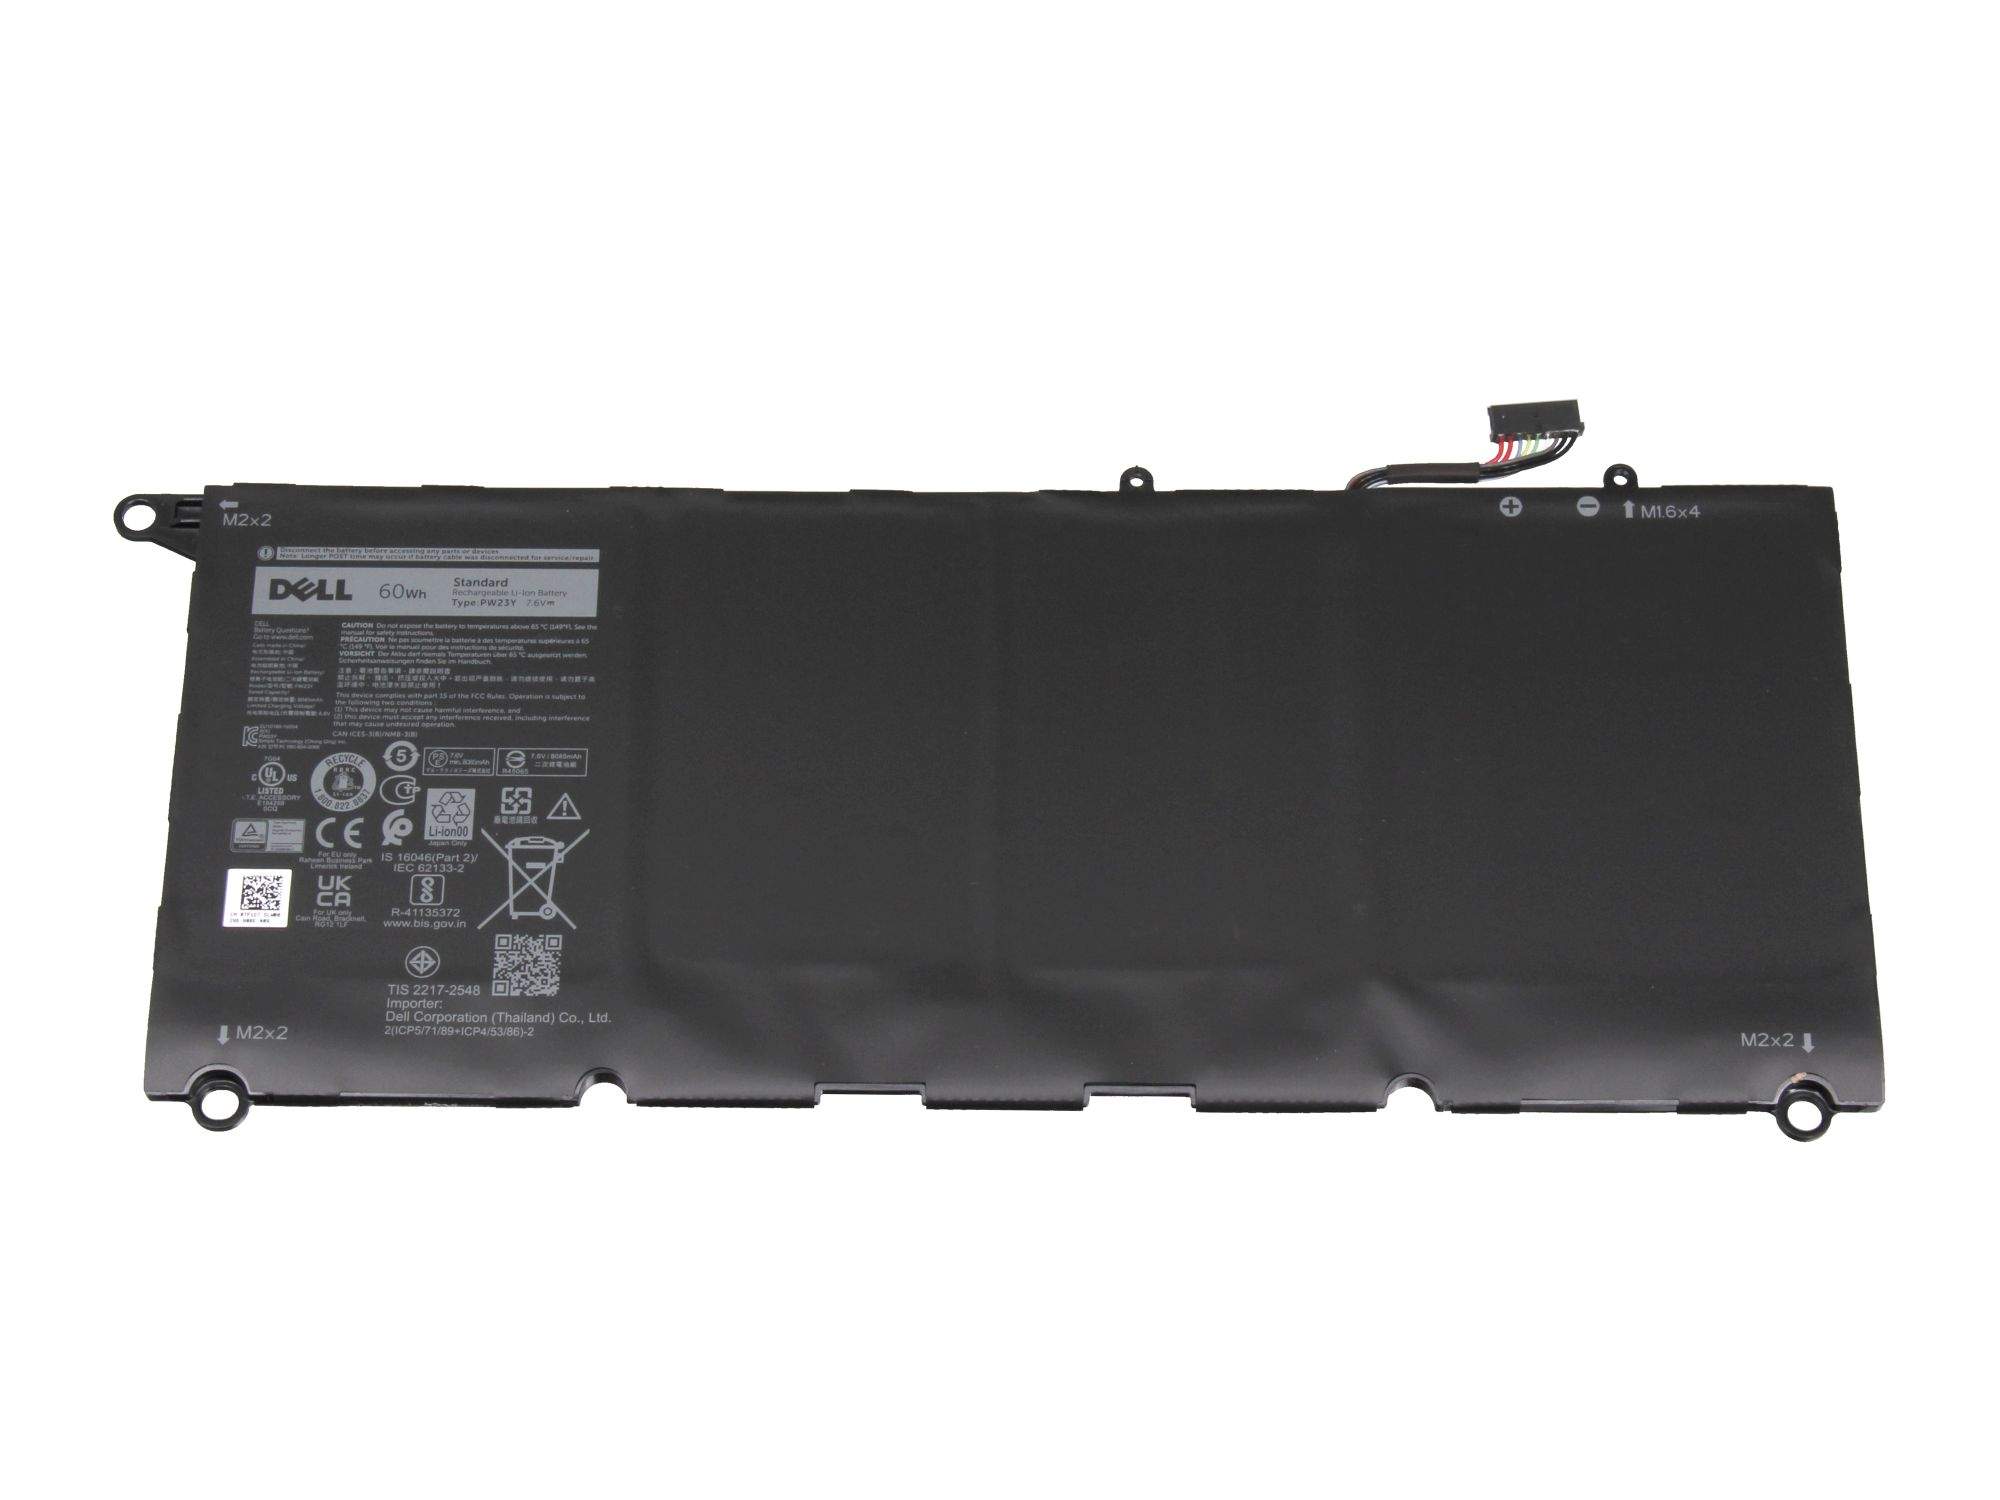 DELL Battery 60Whr 4Cell